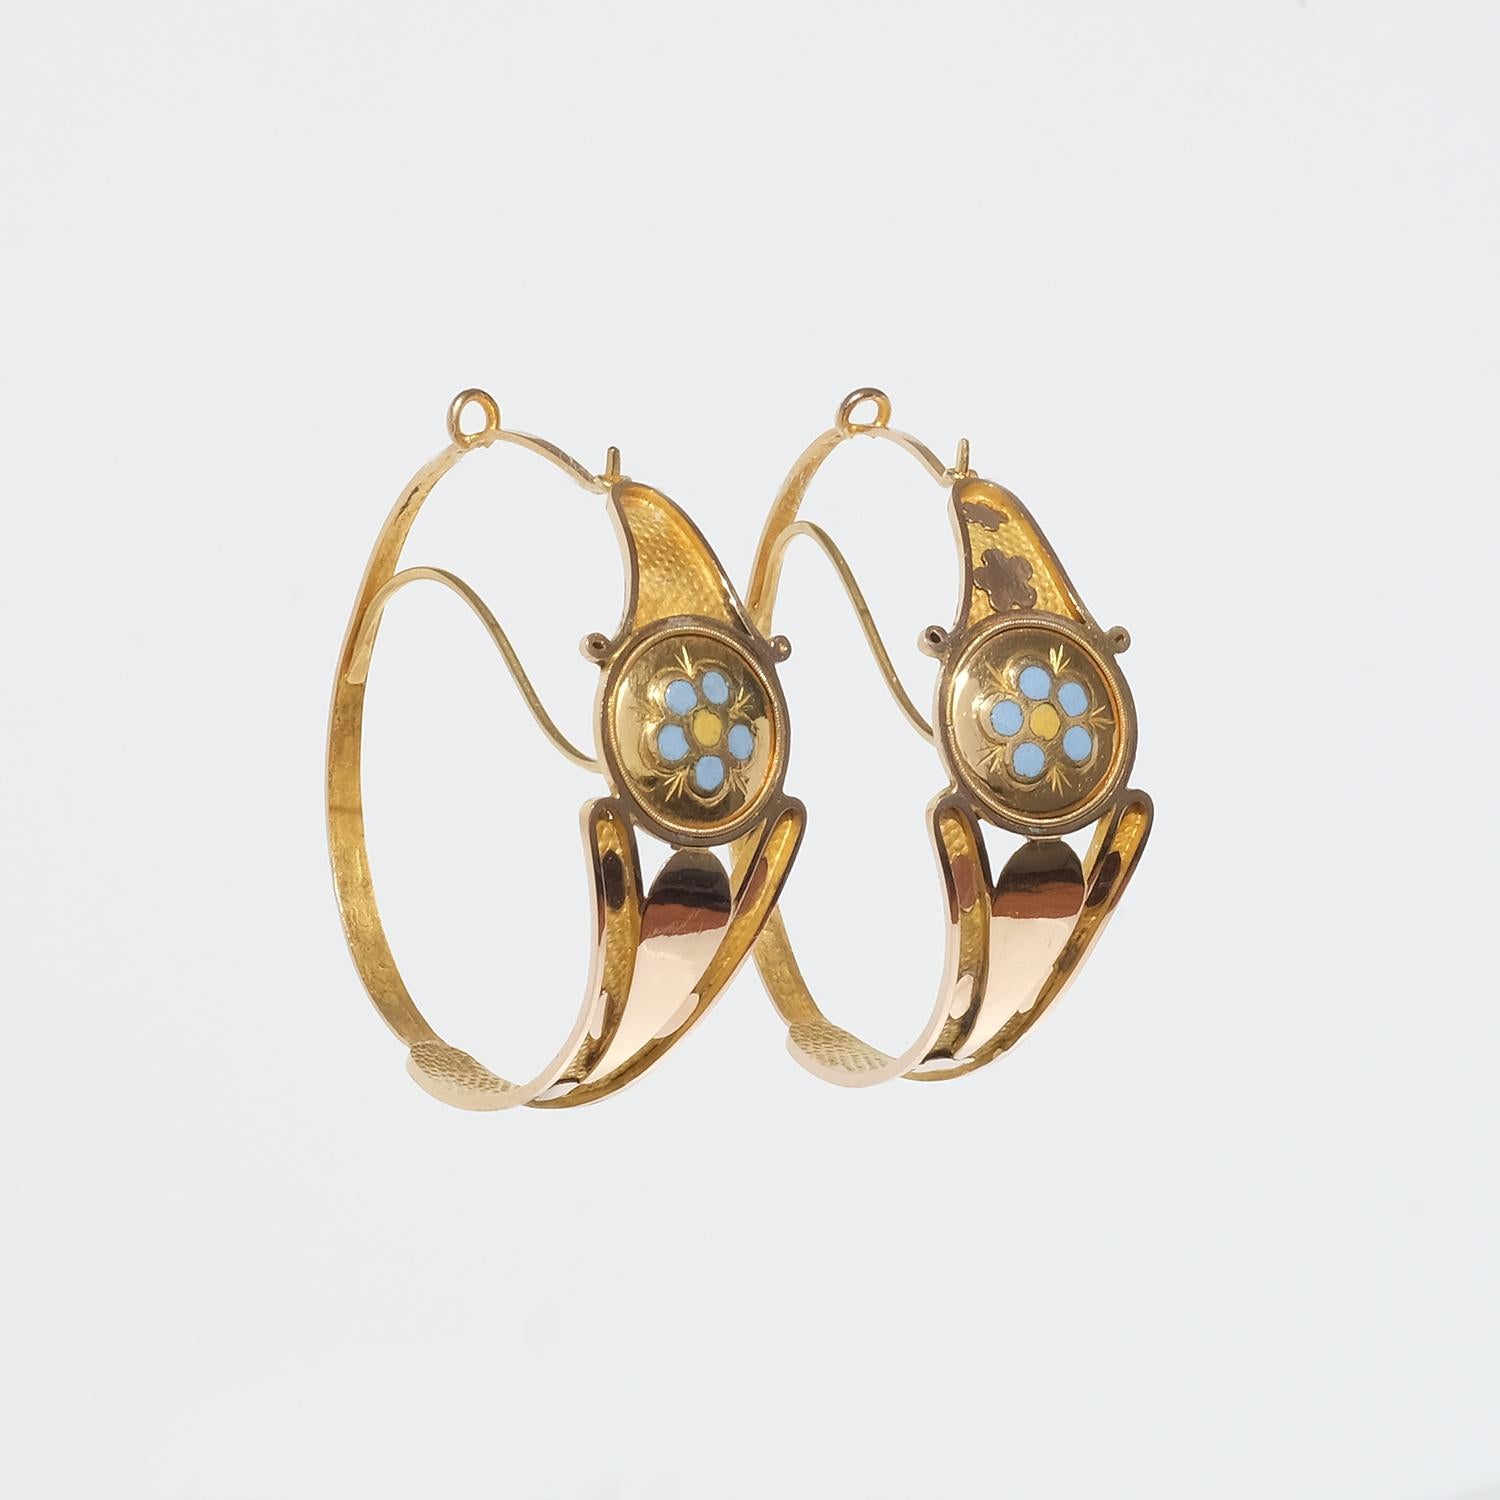 Pair of 18 K Gold Earrings Made Year 1820 1